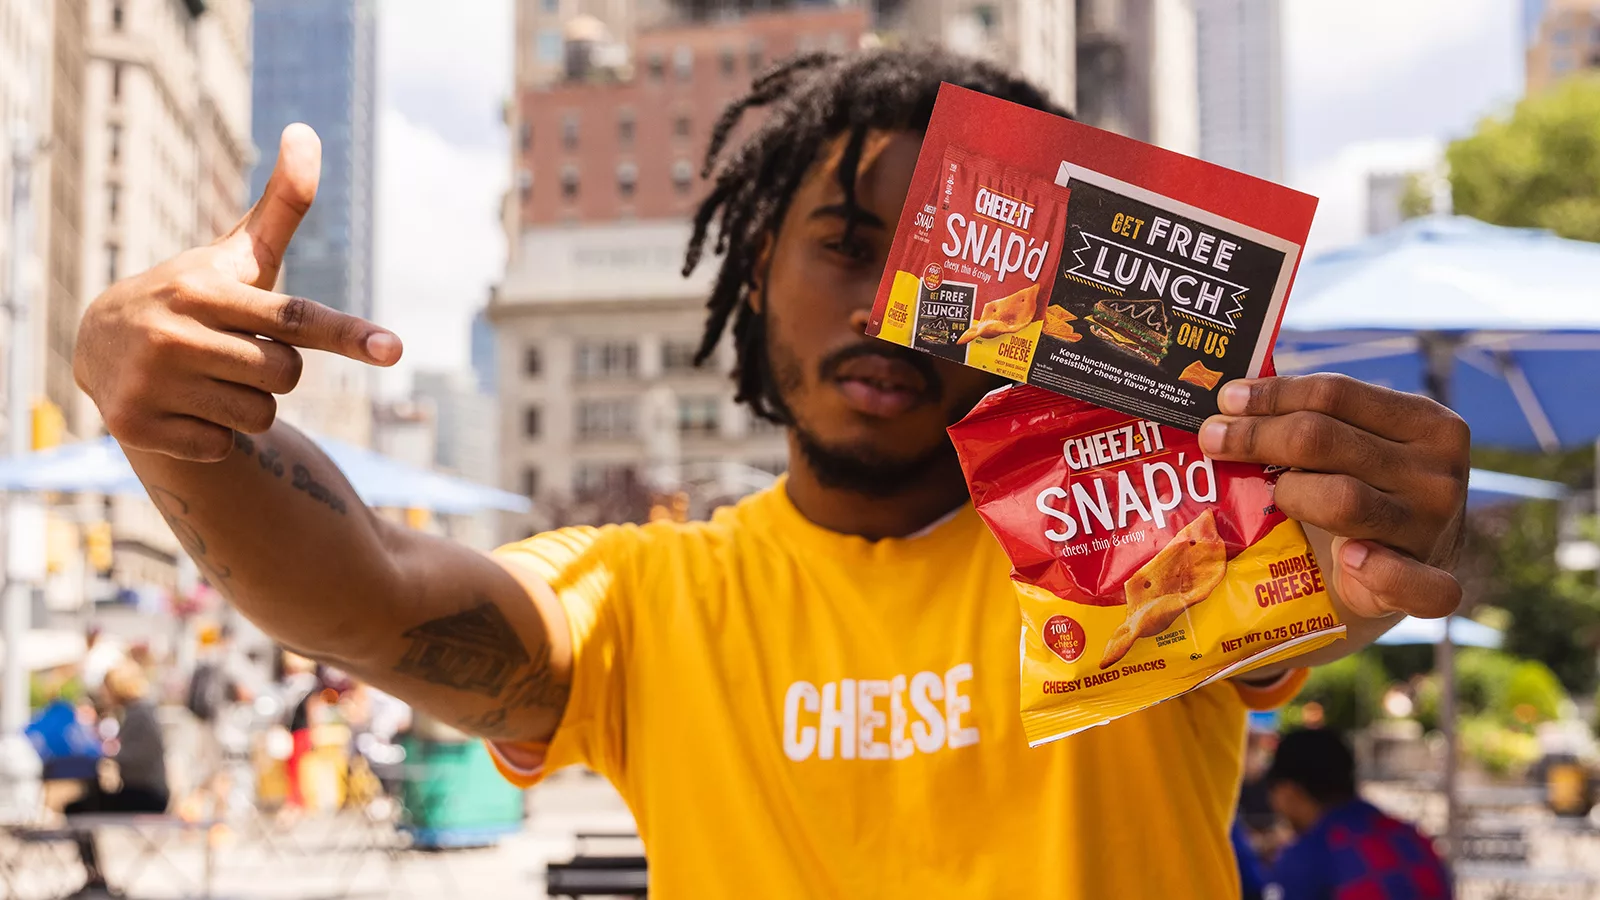 CHEEZ-IT Snap’d: The Cheddar Twins Save Lunch